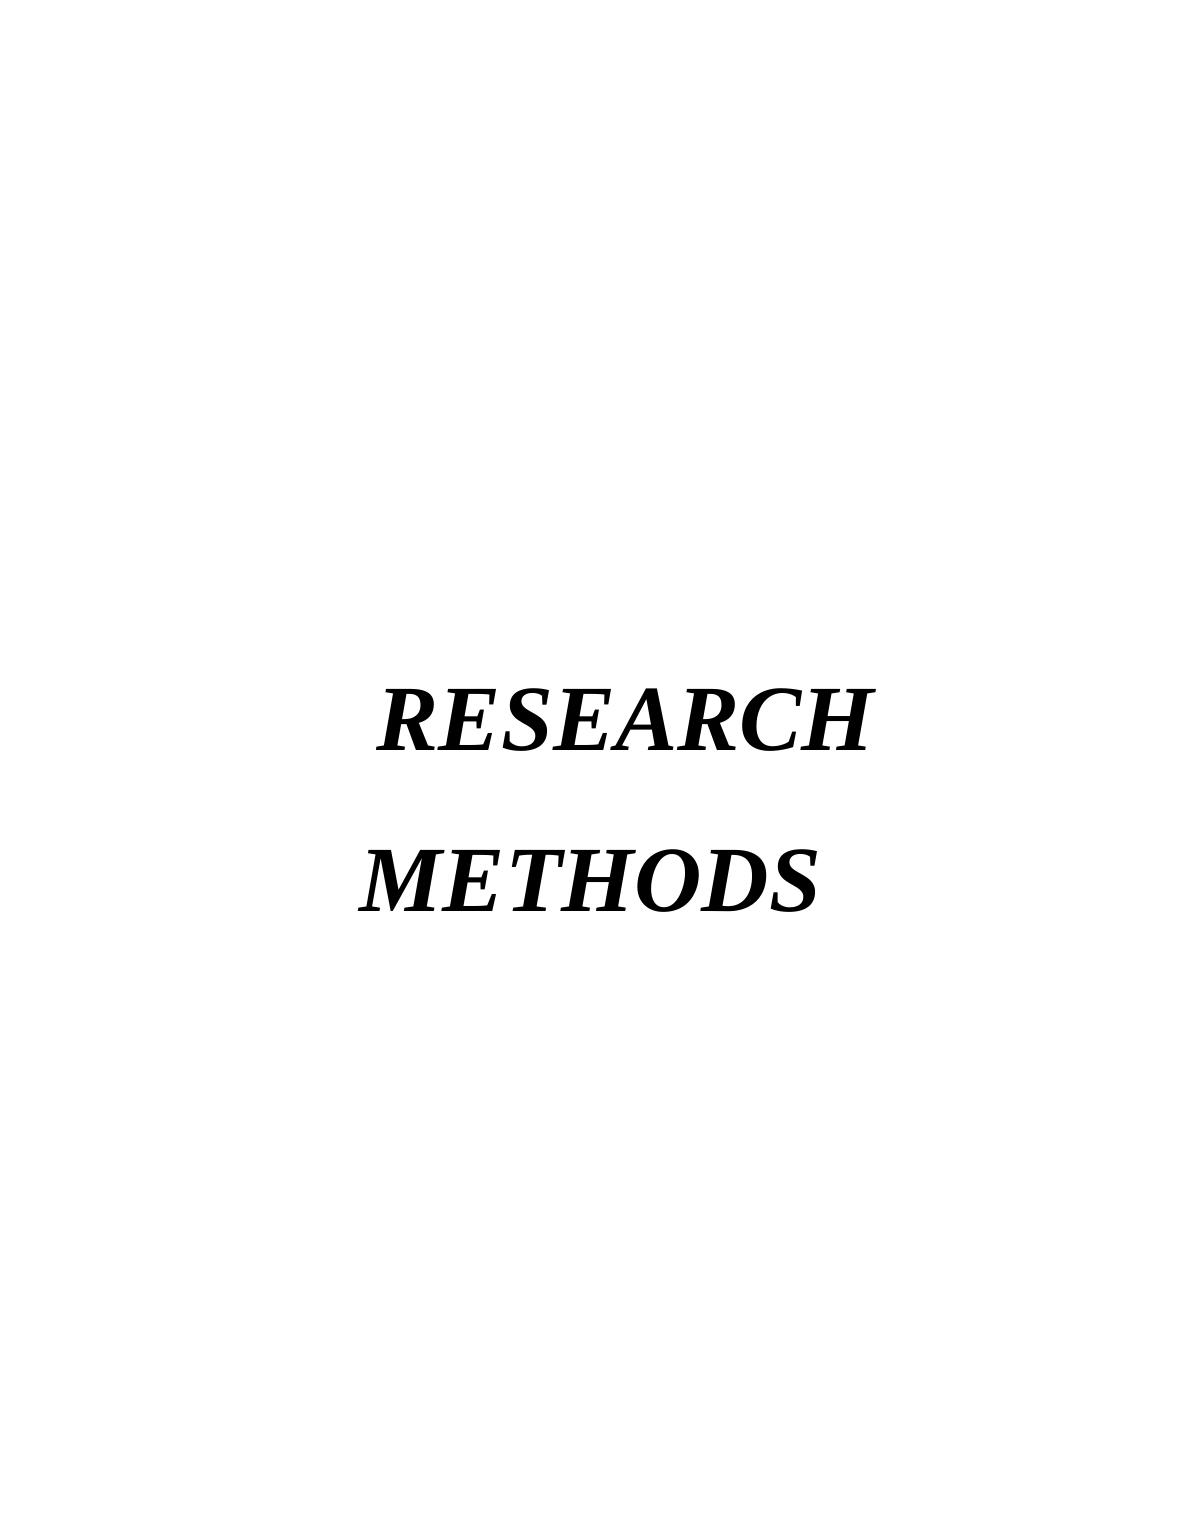 Research Methods EXEUTIVE SUMMARY 1 Overview to the Organizational Problem 1 2.1 Overview to the Organization 1 2.2 Problem Identification and Analysis 3 3.1 UN Funding and Promotion Strategy_1